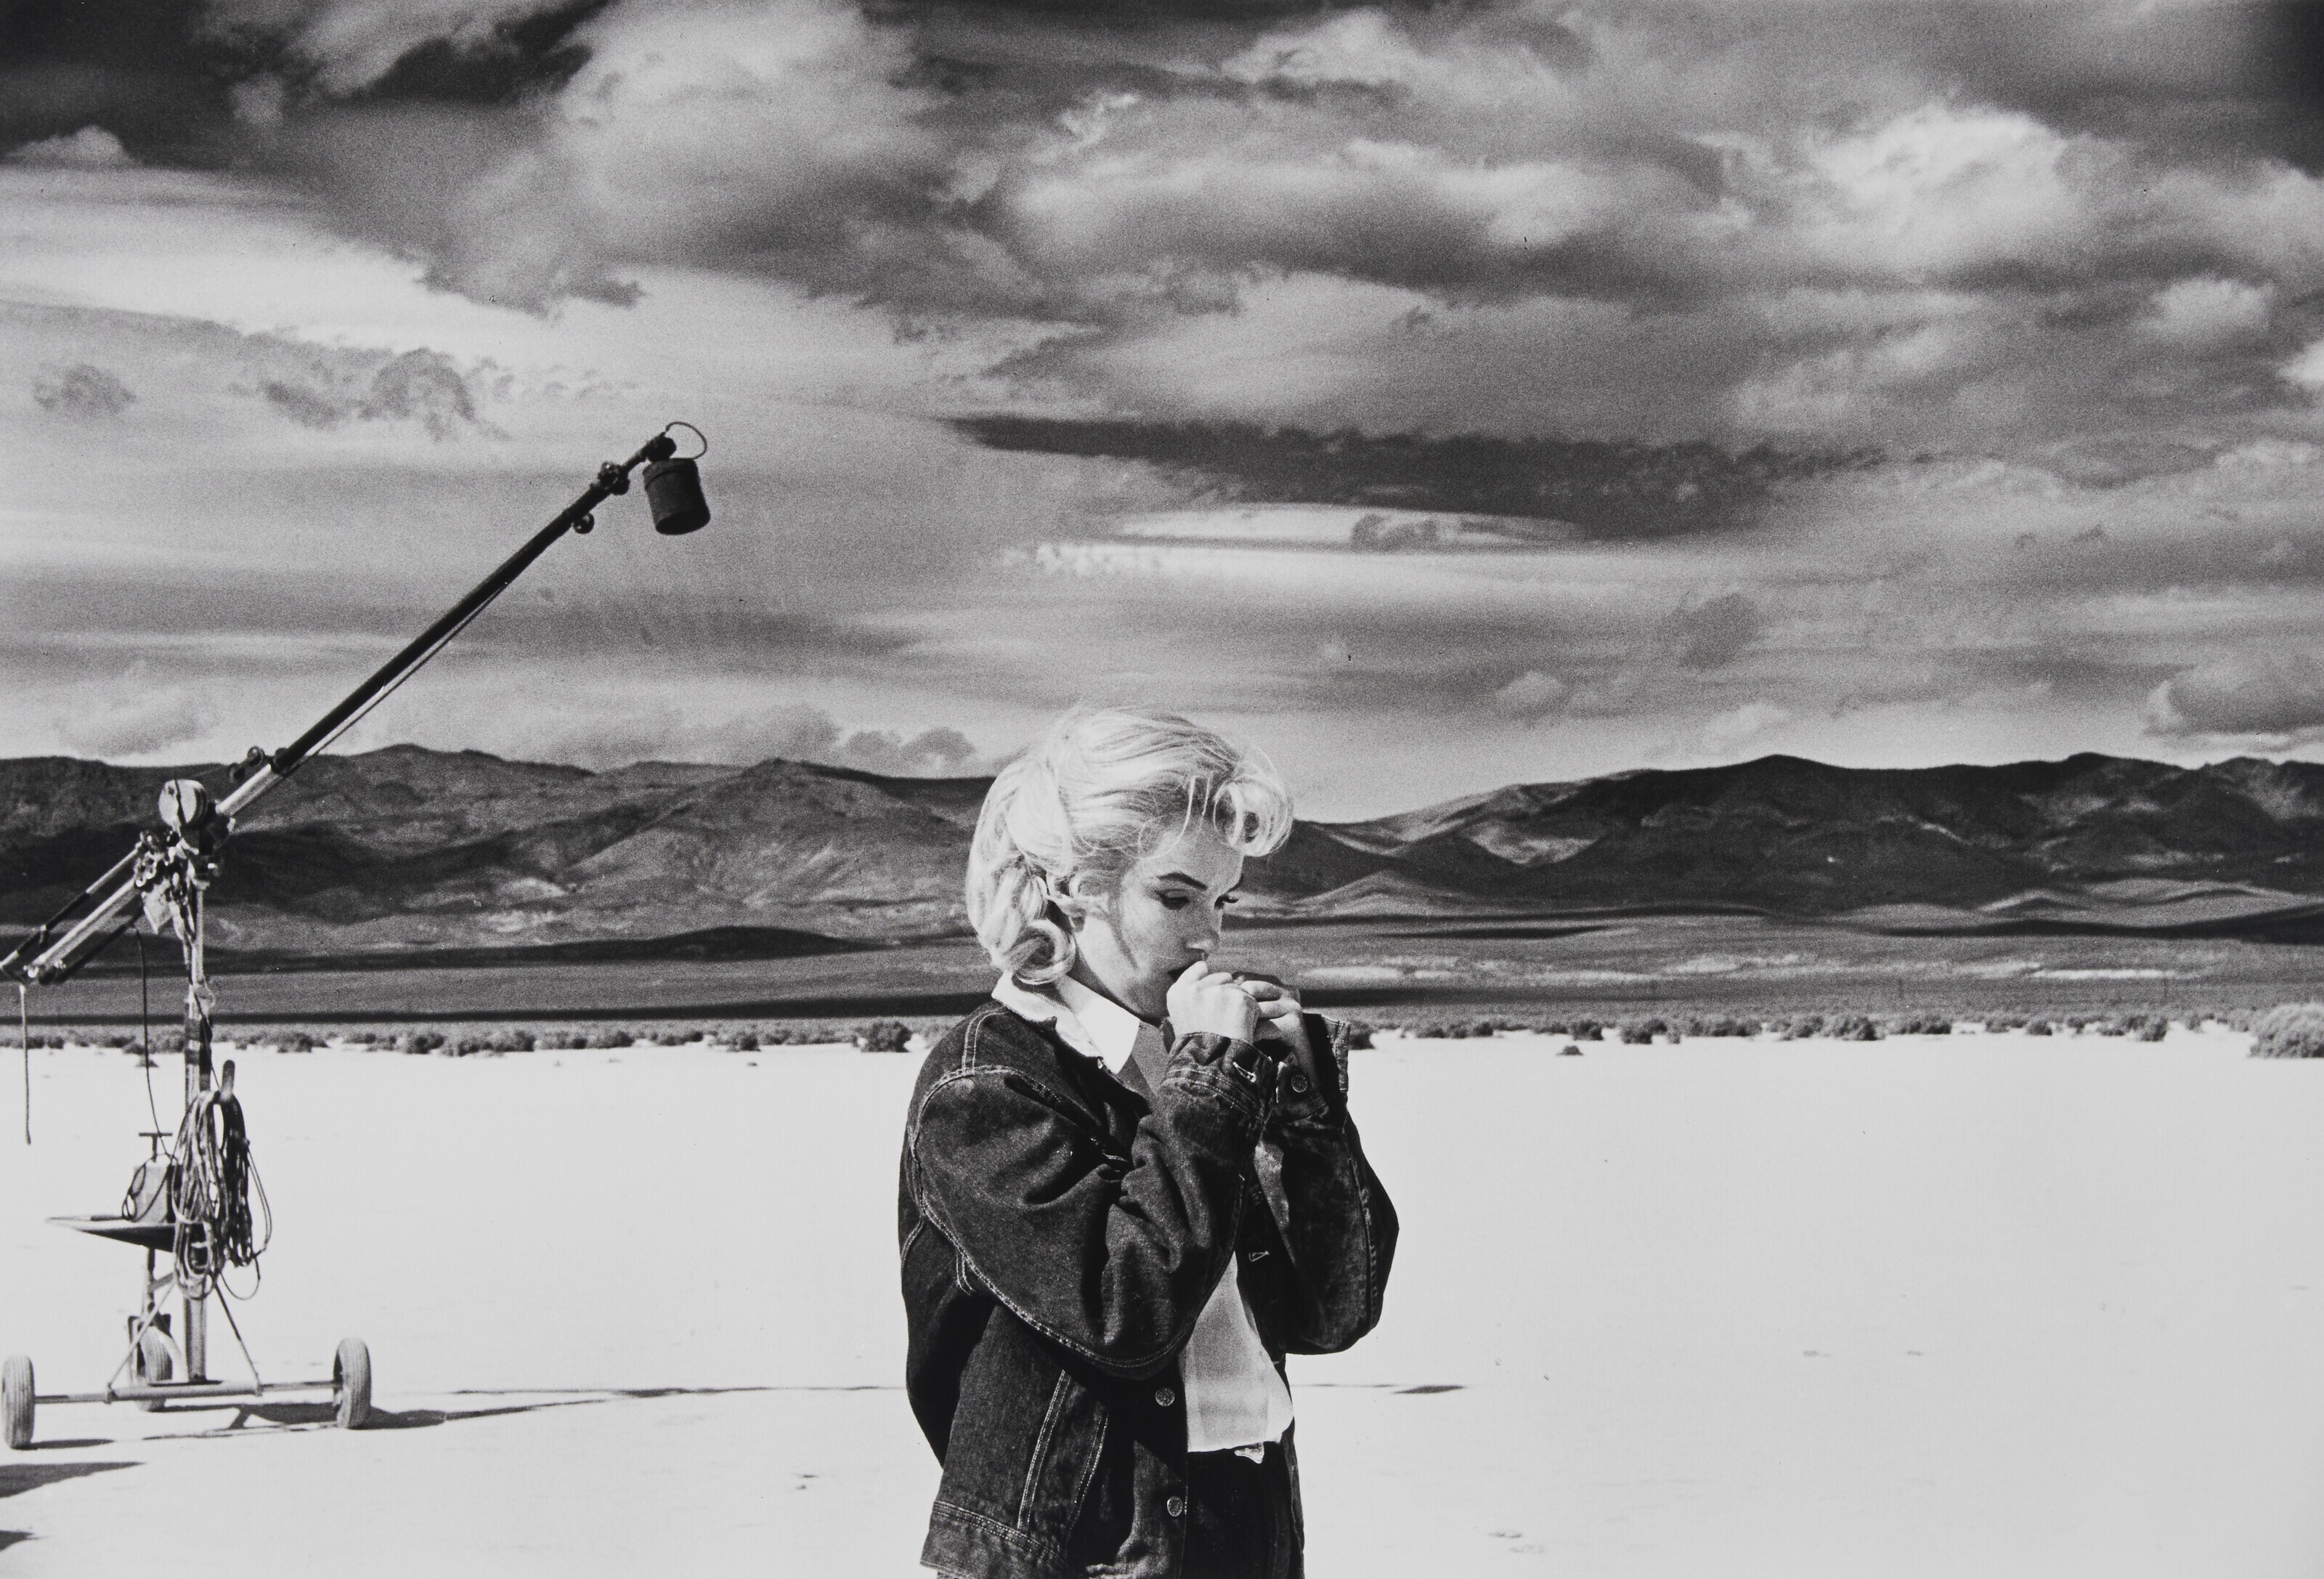 Marilyn Monroe during filming of The Misfits in the Nevada desert rehearsing lines for a scene with Clark Gable, 1960 - Eve Arnold